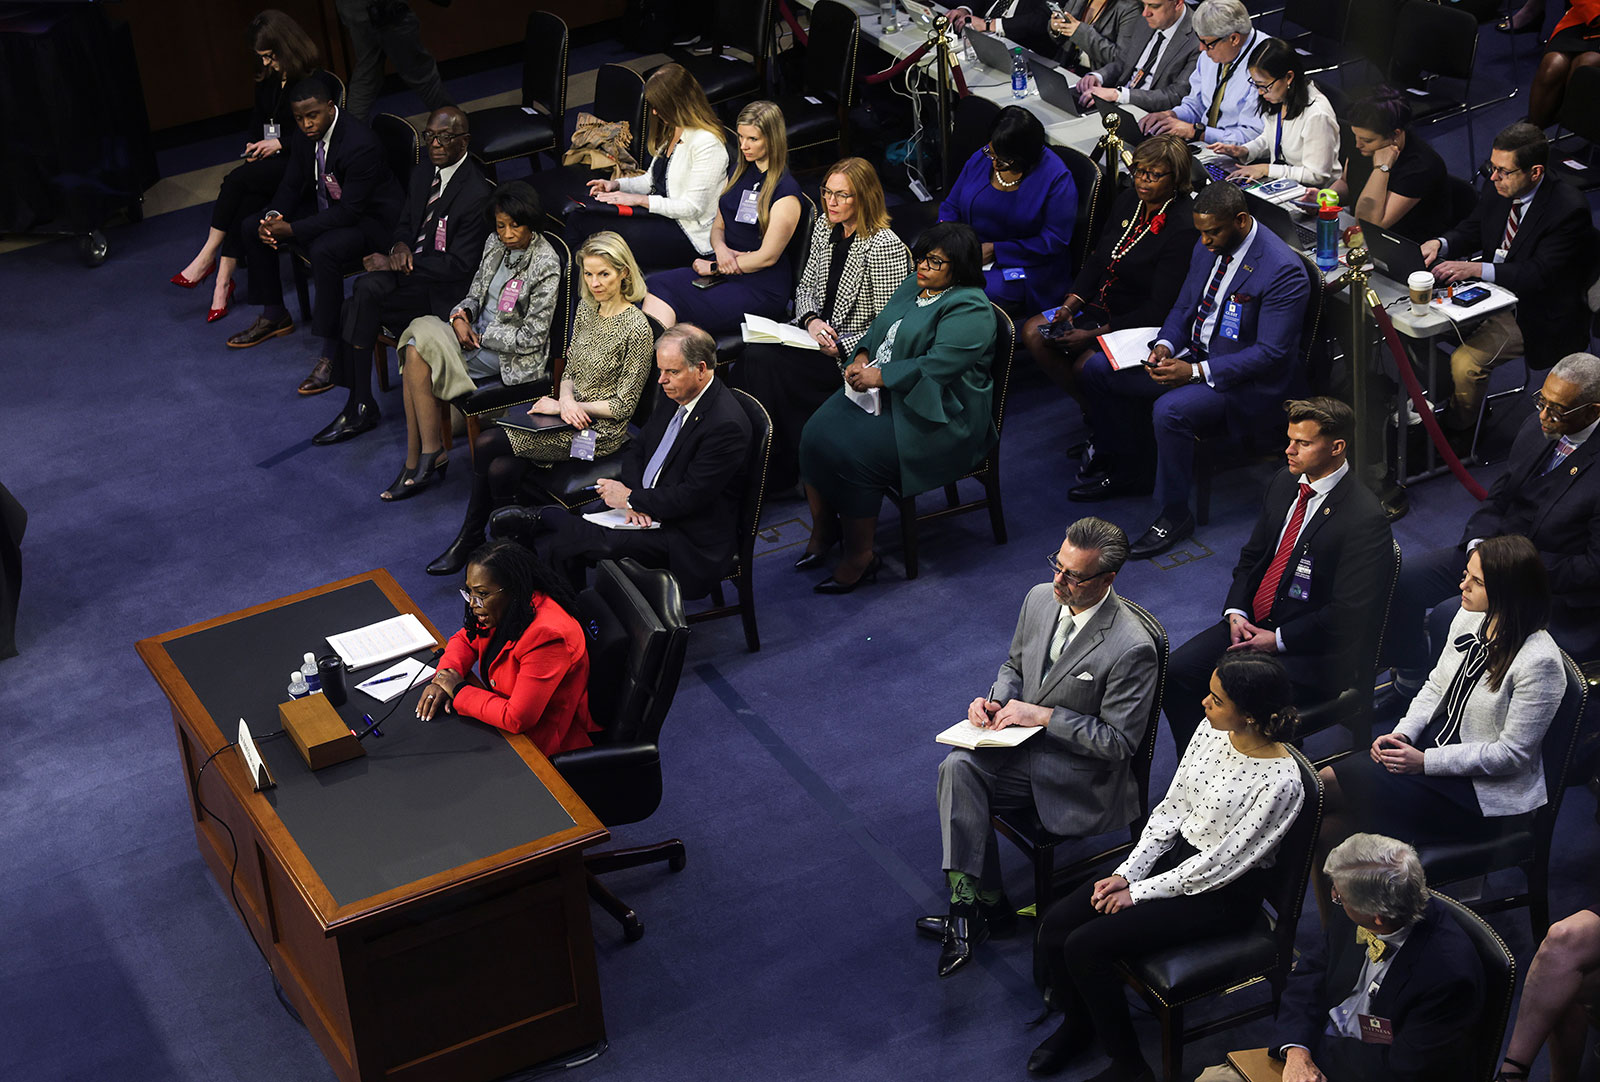 US Supreme Court nominee Judge Ketanji Brown Jackson responds during her confirmation hearing before the Senate Judiciary Committee.